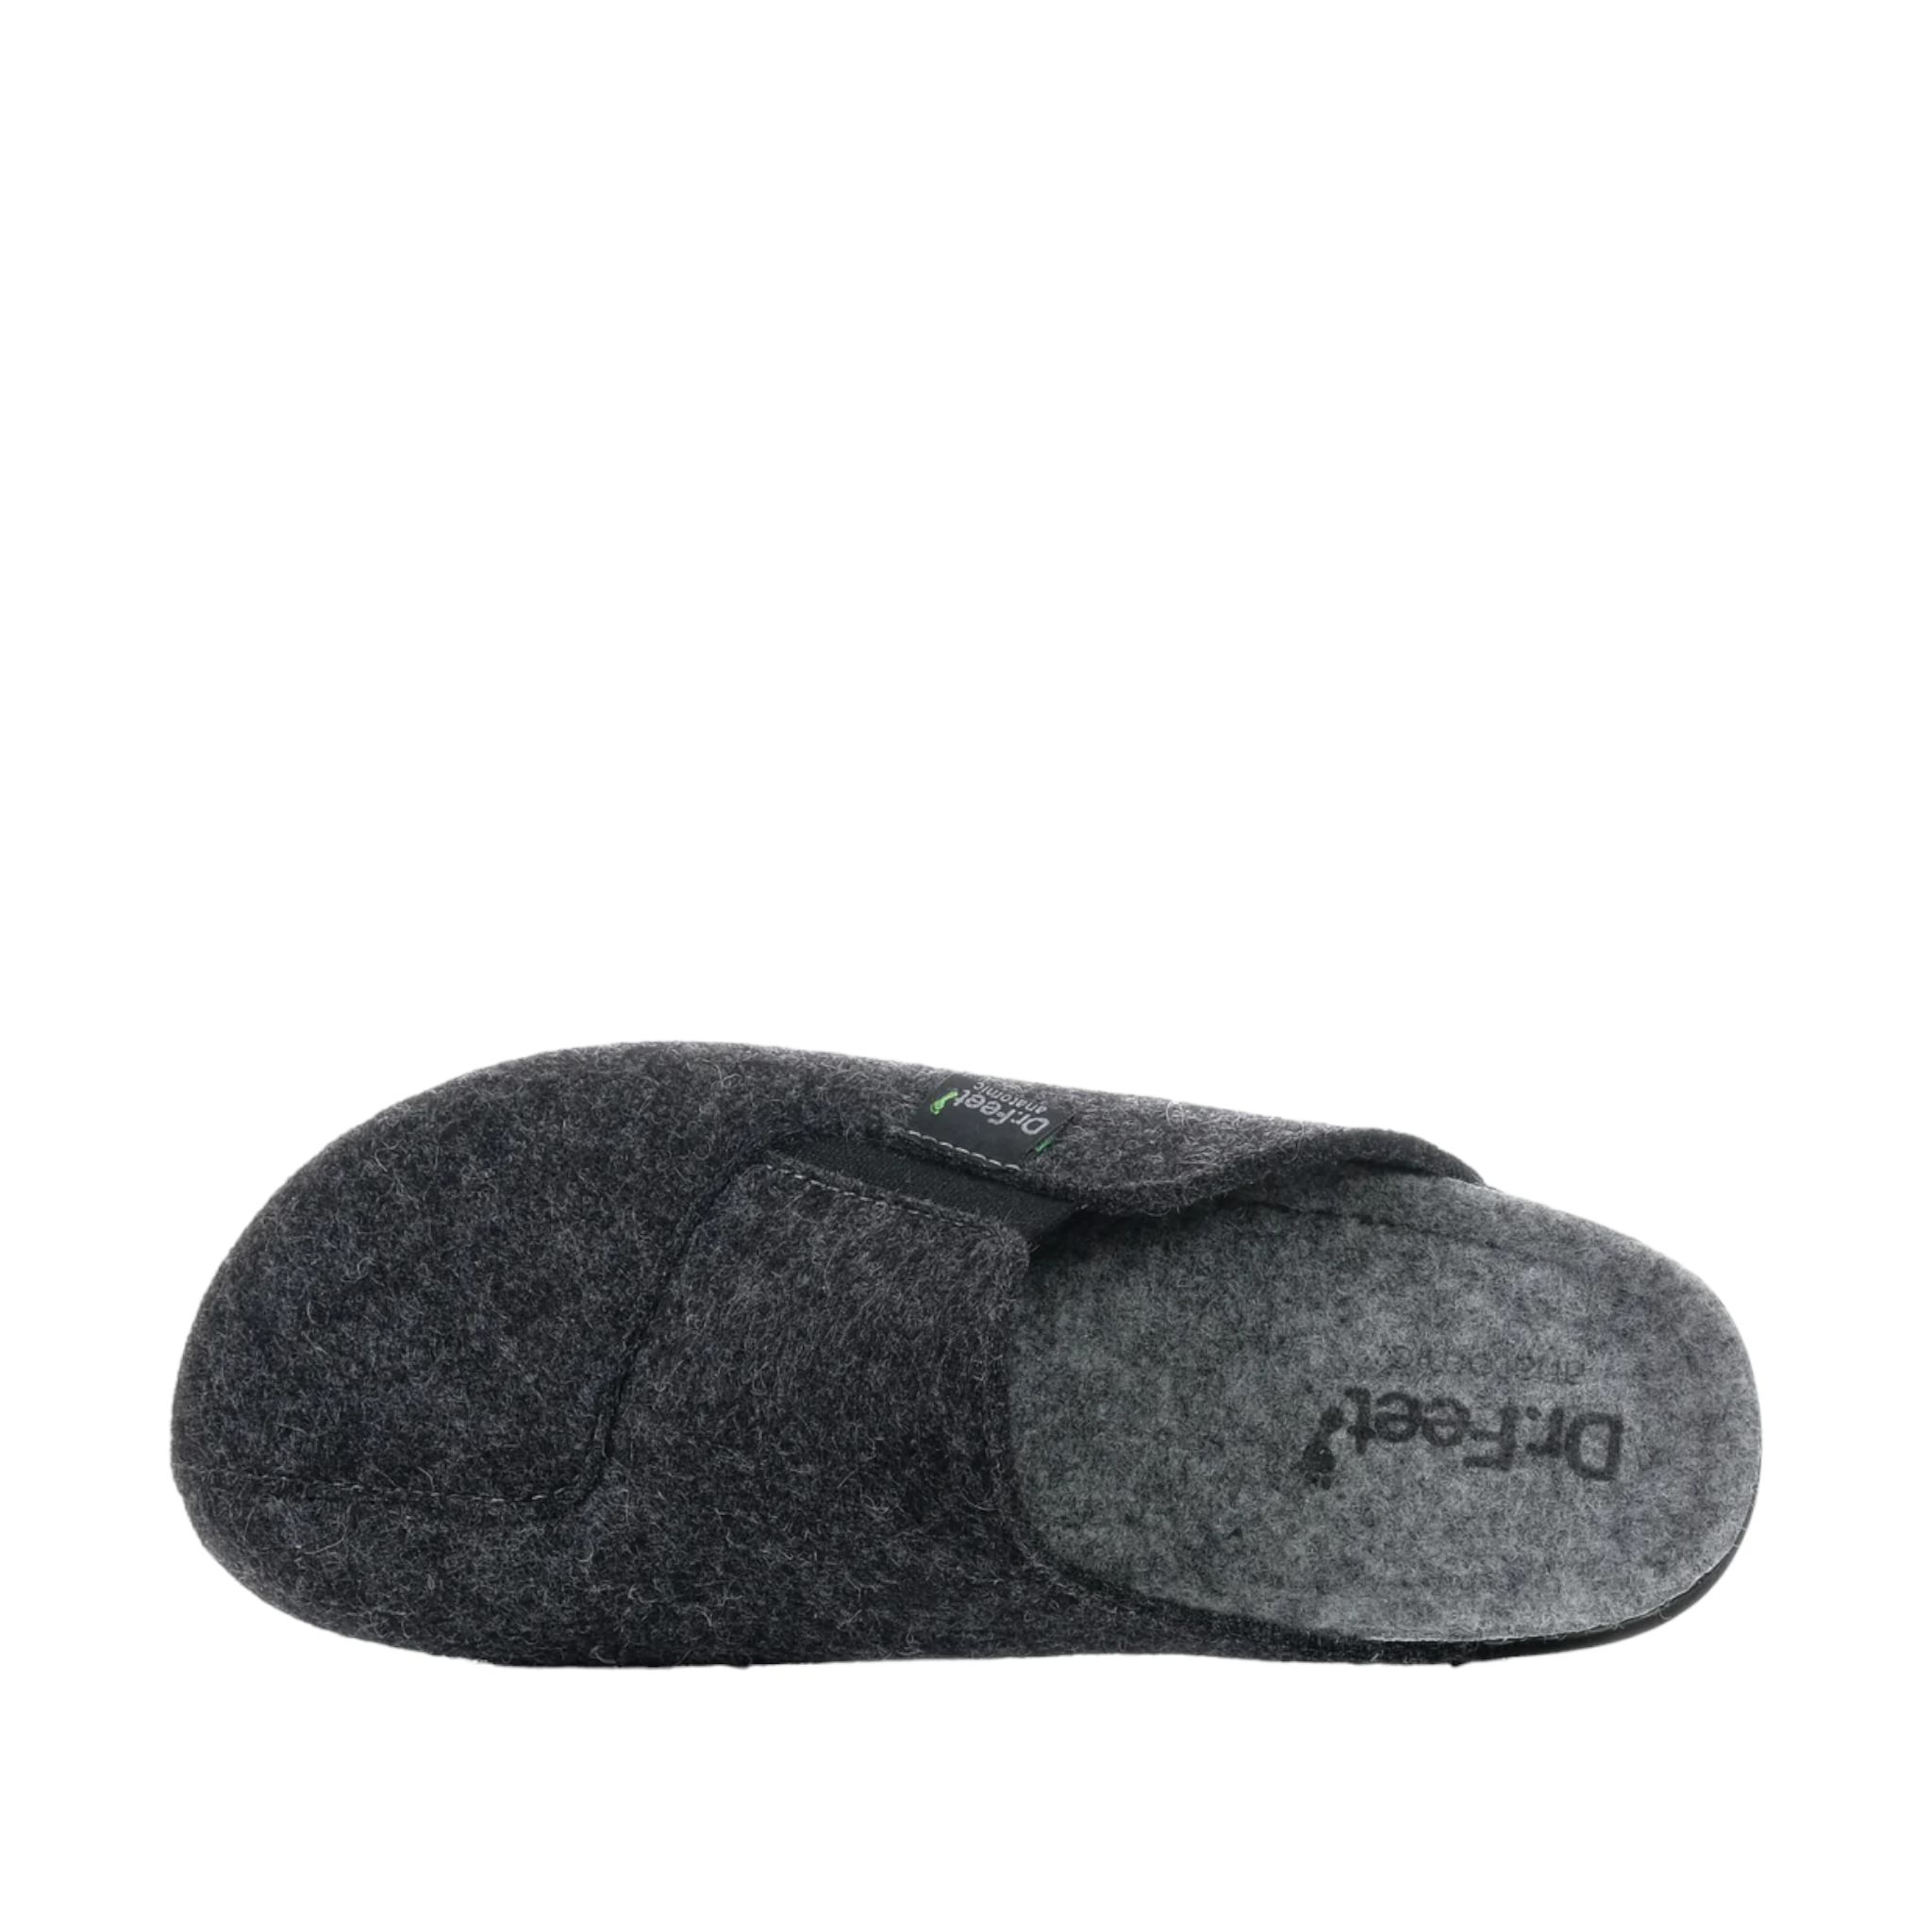 Shop Mens Felt Mule Slippers Online and In-store. Dark Grey felt with light grey inner sole. Slight Gusset on out side of upper. Shop Online and In-Store with shoe&amp;me